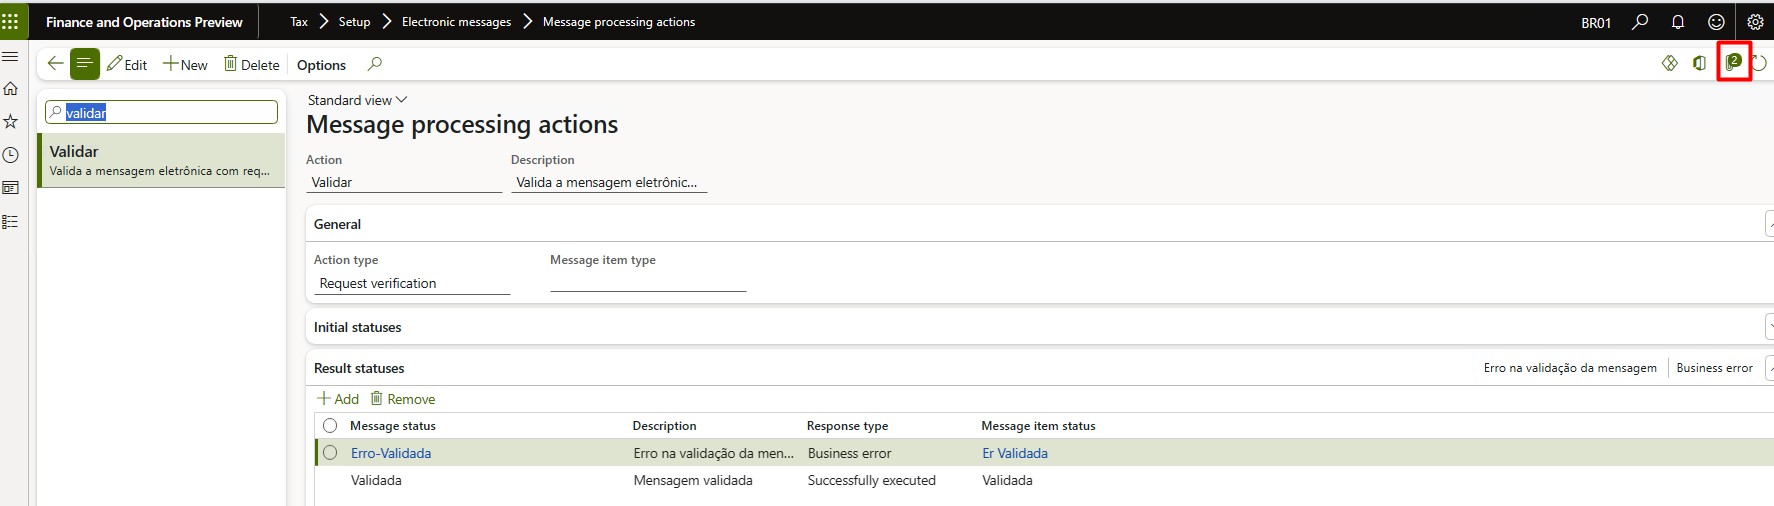 Attachments button on the Message processing actions page.